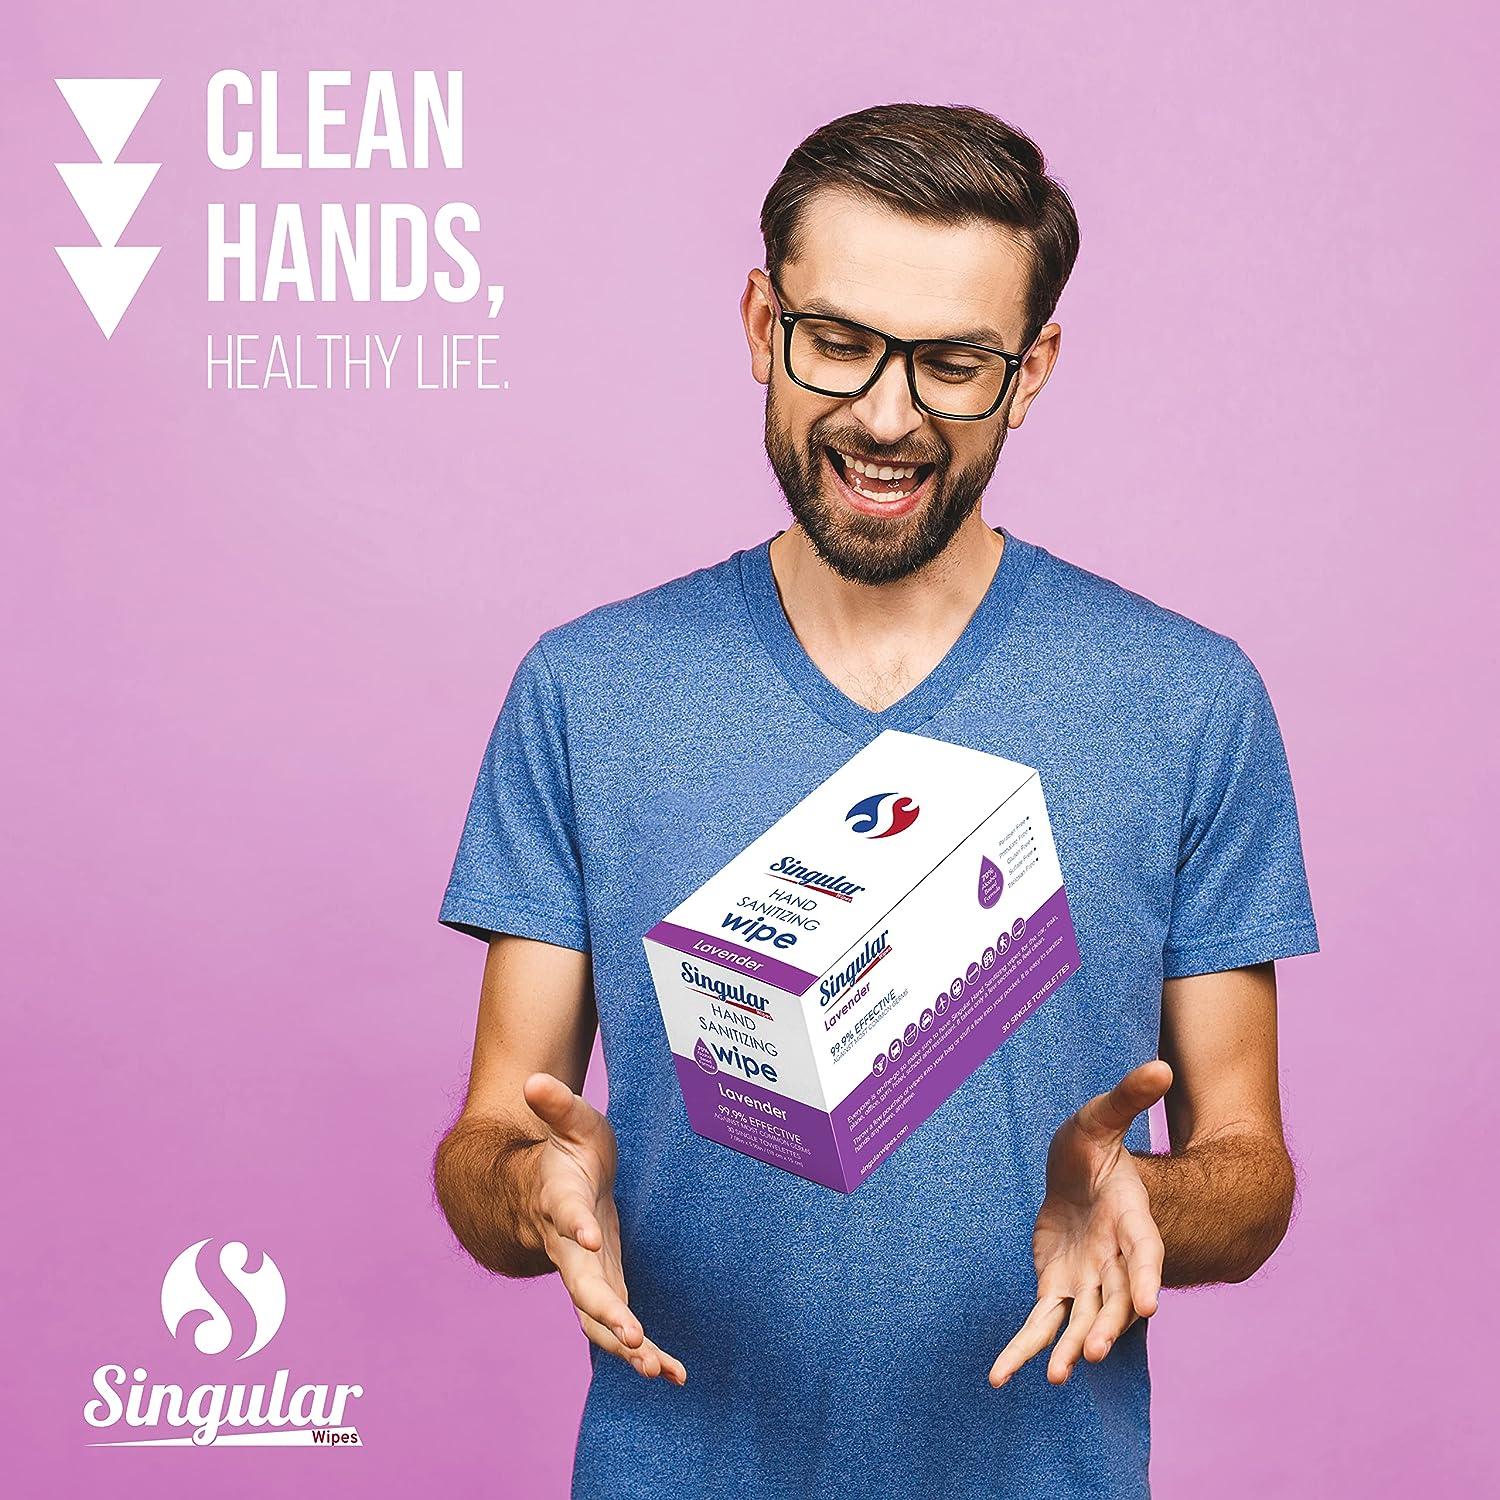 Sanitizing Hand Wipes - Lavender Travel Hand wipes - Antibacterial Wipes